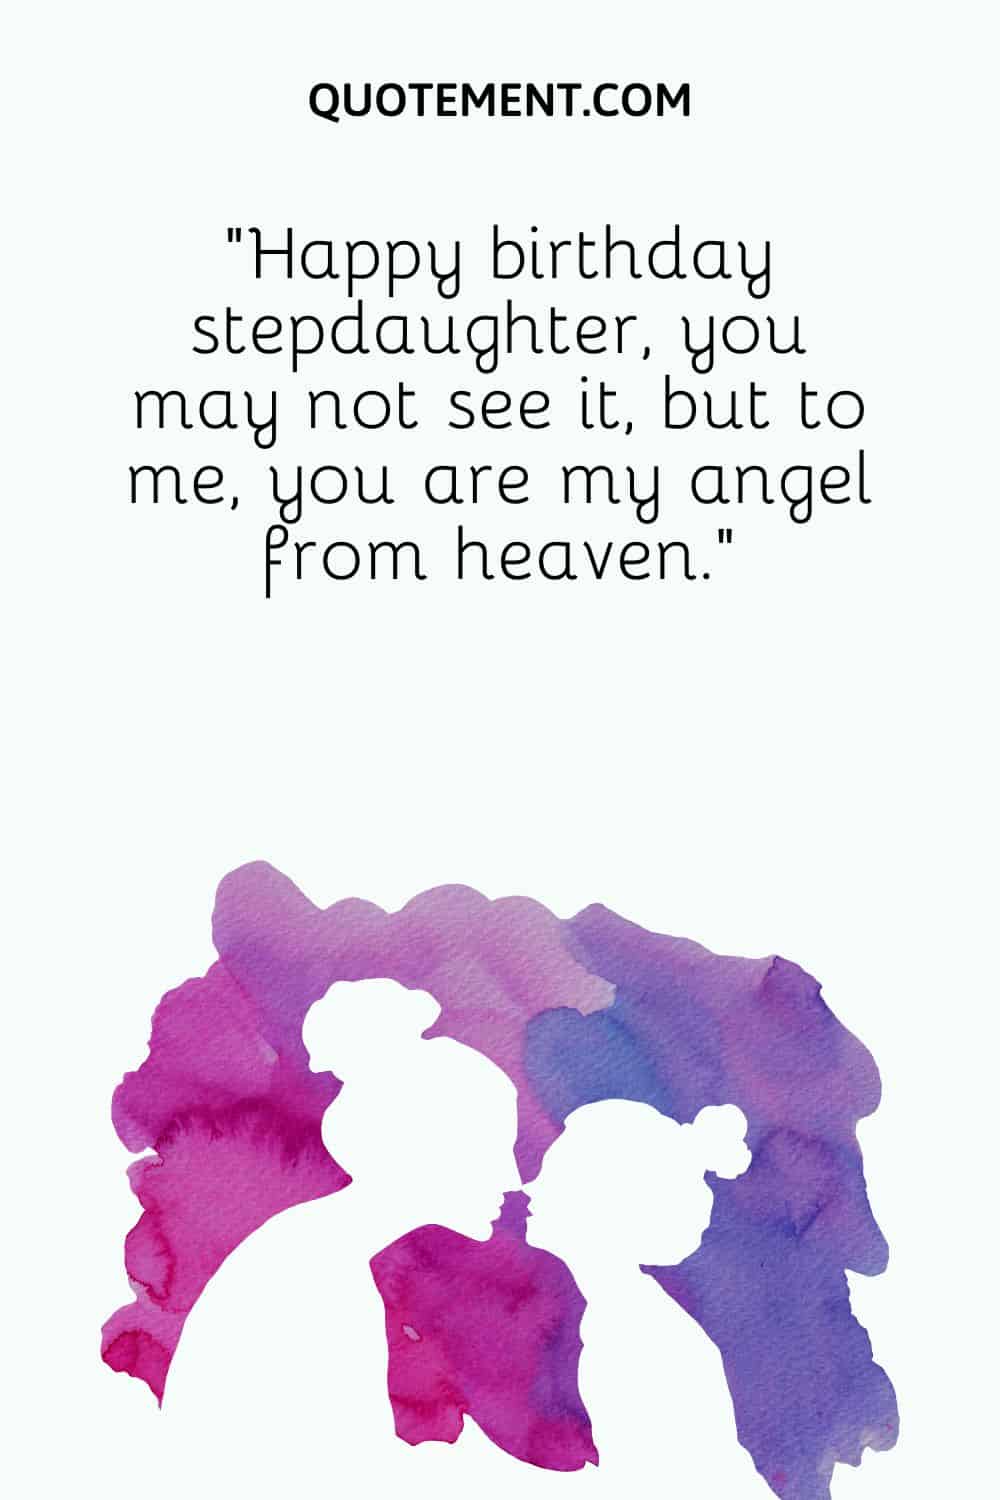 Happy birthday stepdaughter, you may not see it, but to me, you are my angel from heaven